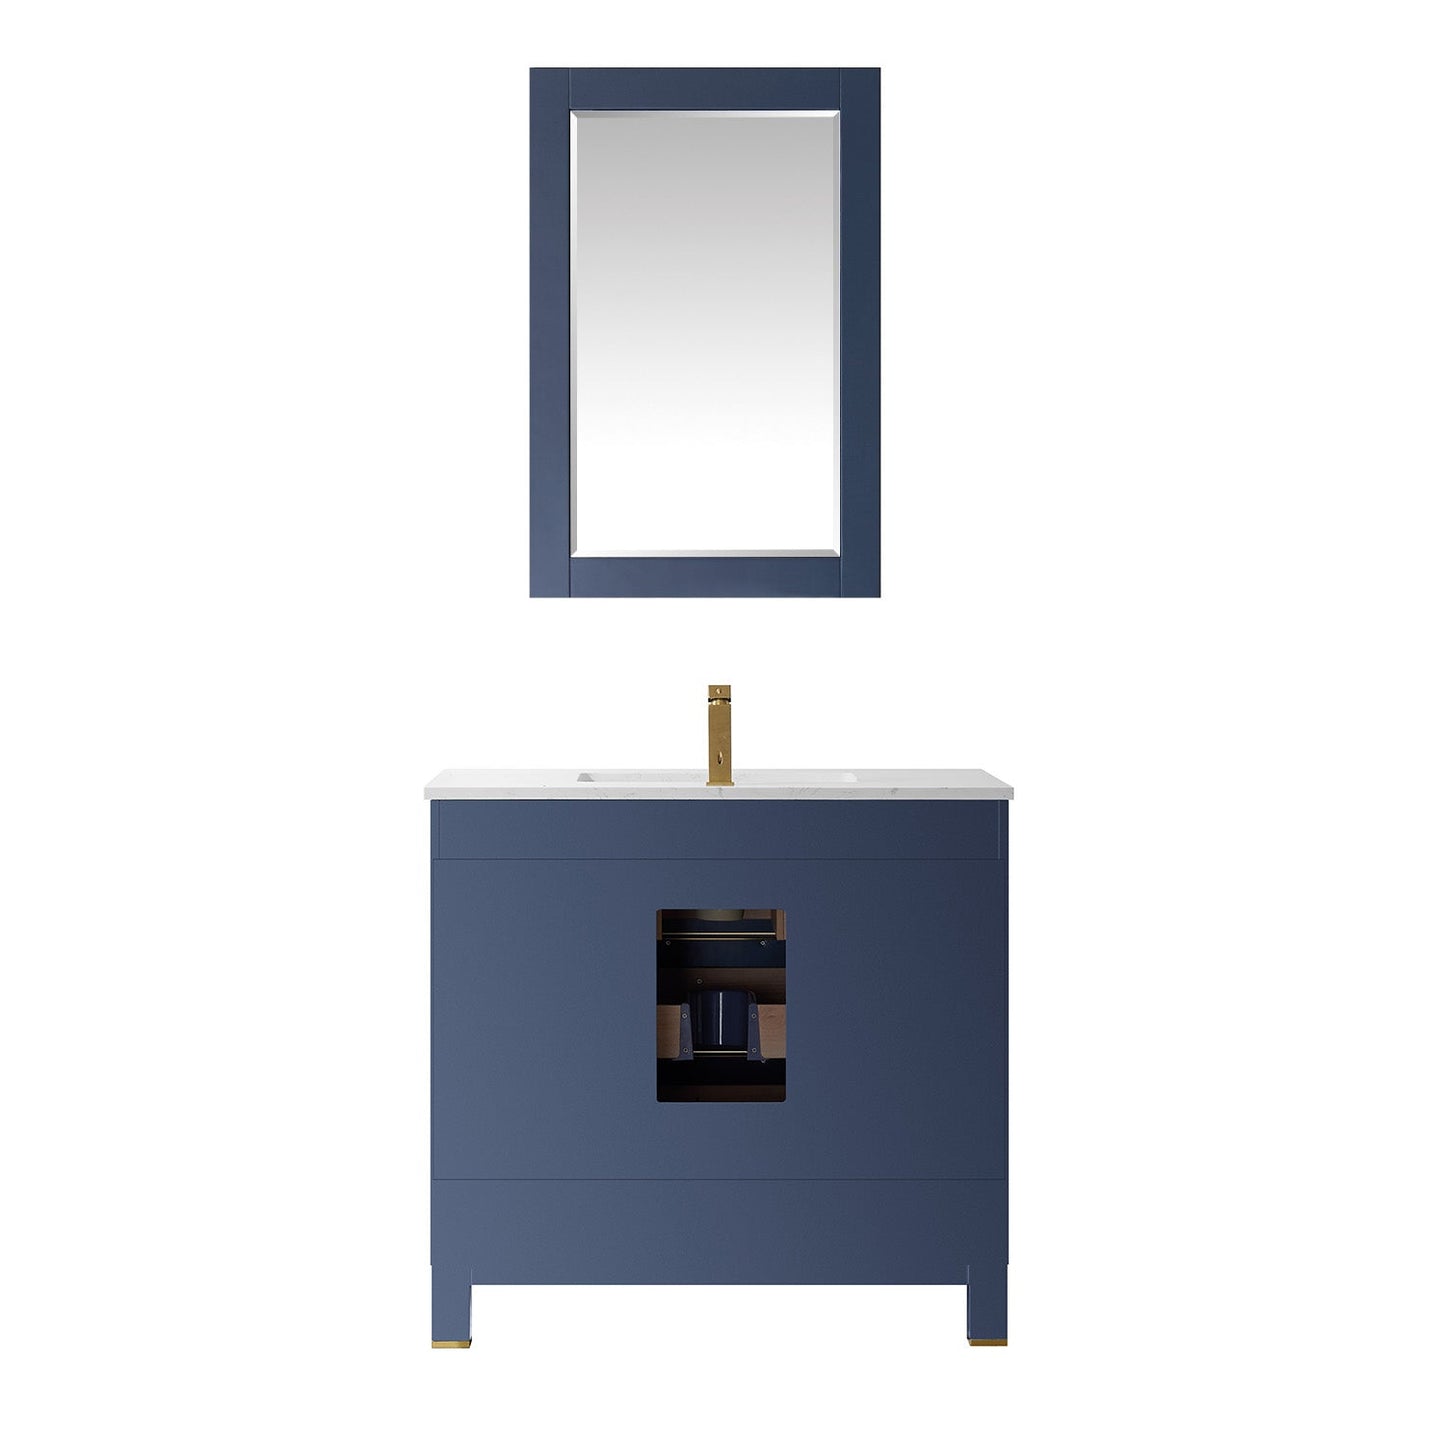 Jackson 36" Single Bathroom Vanity Set in Royal Blue and Composite Carrara White Stone Countertop with Mirror